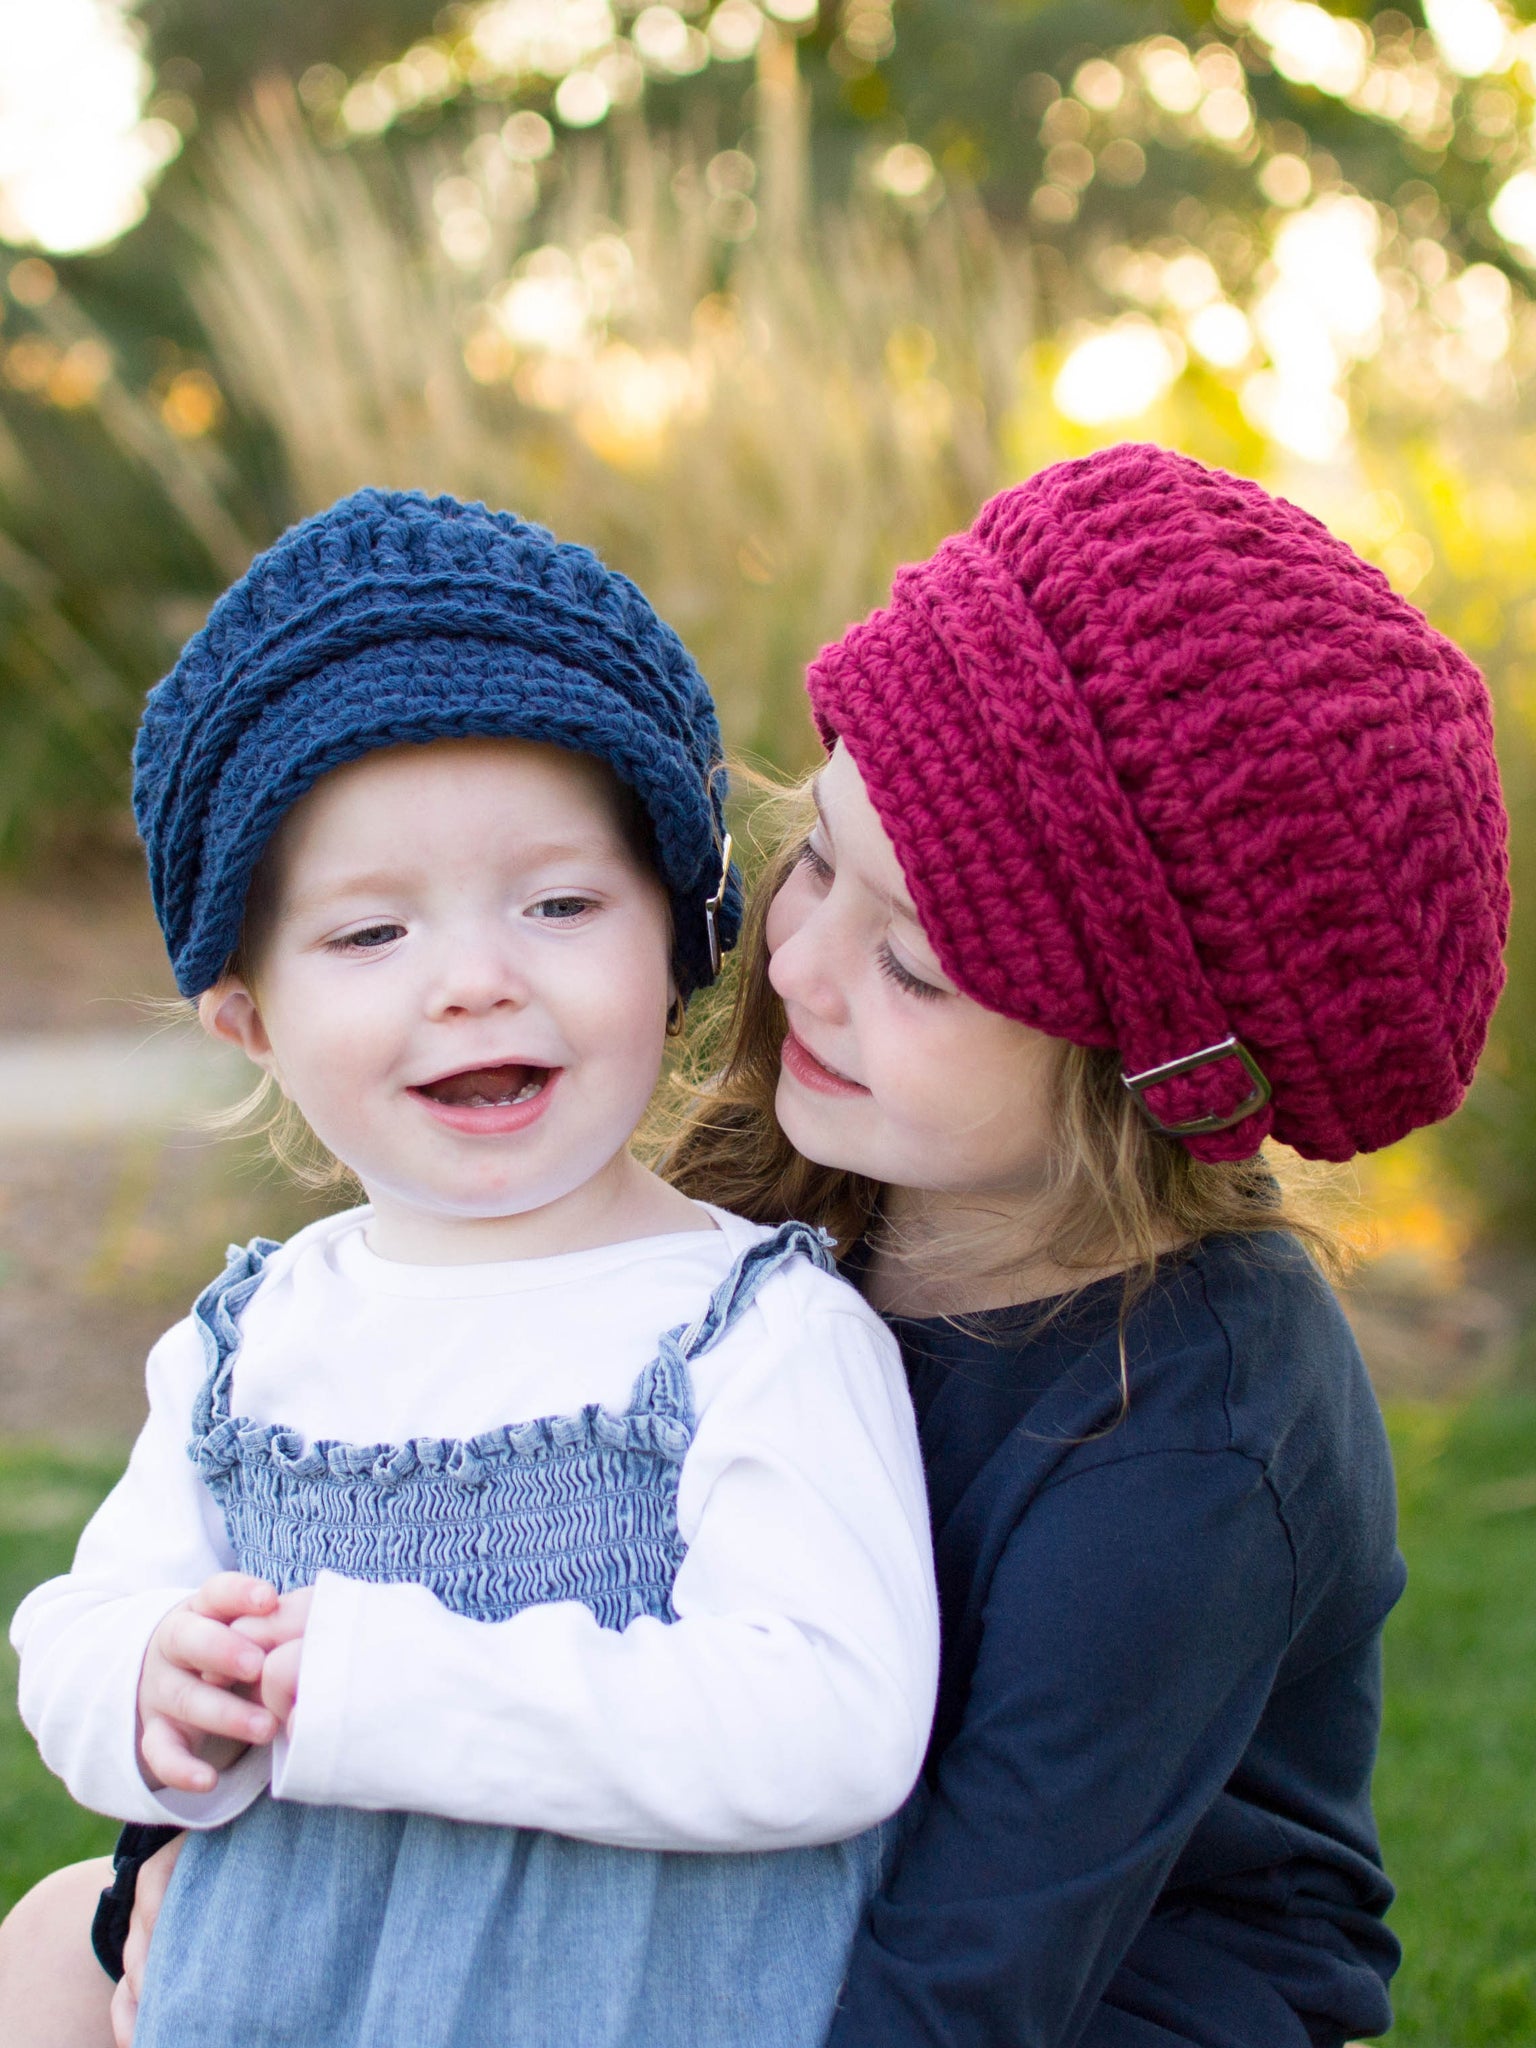 32 colors buckle newsboy cap by Two Seaside Babes